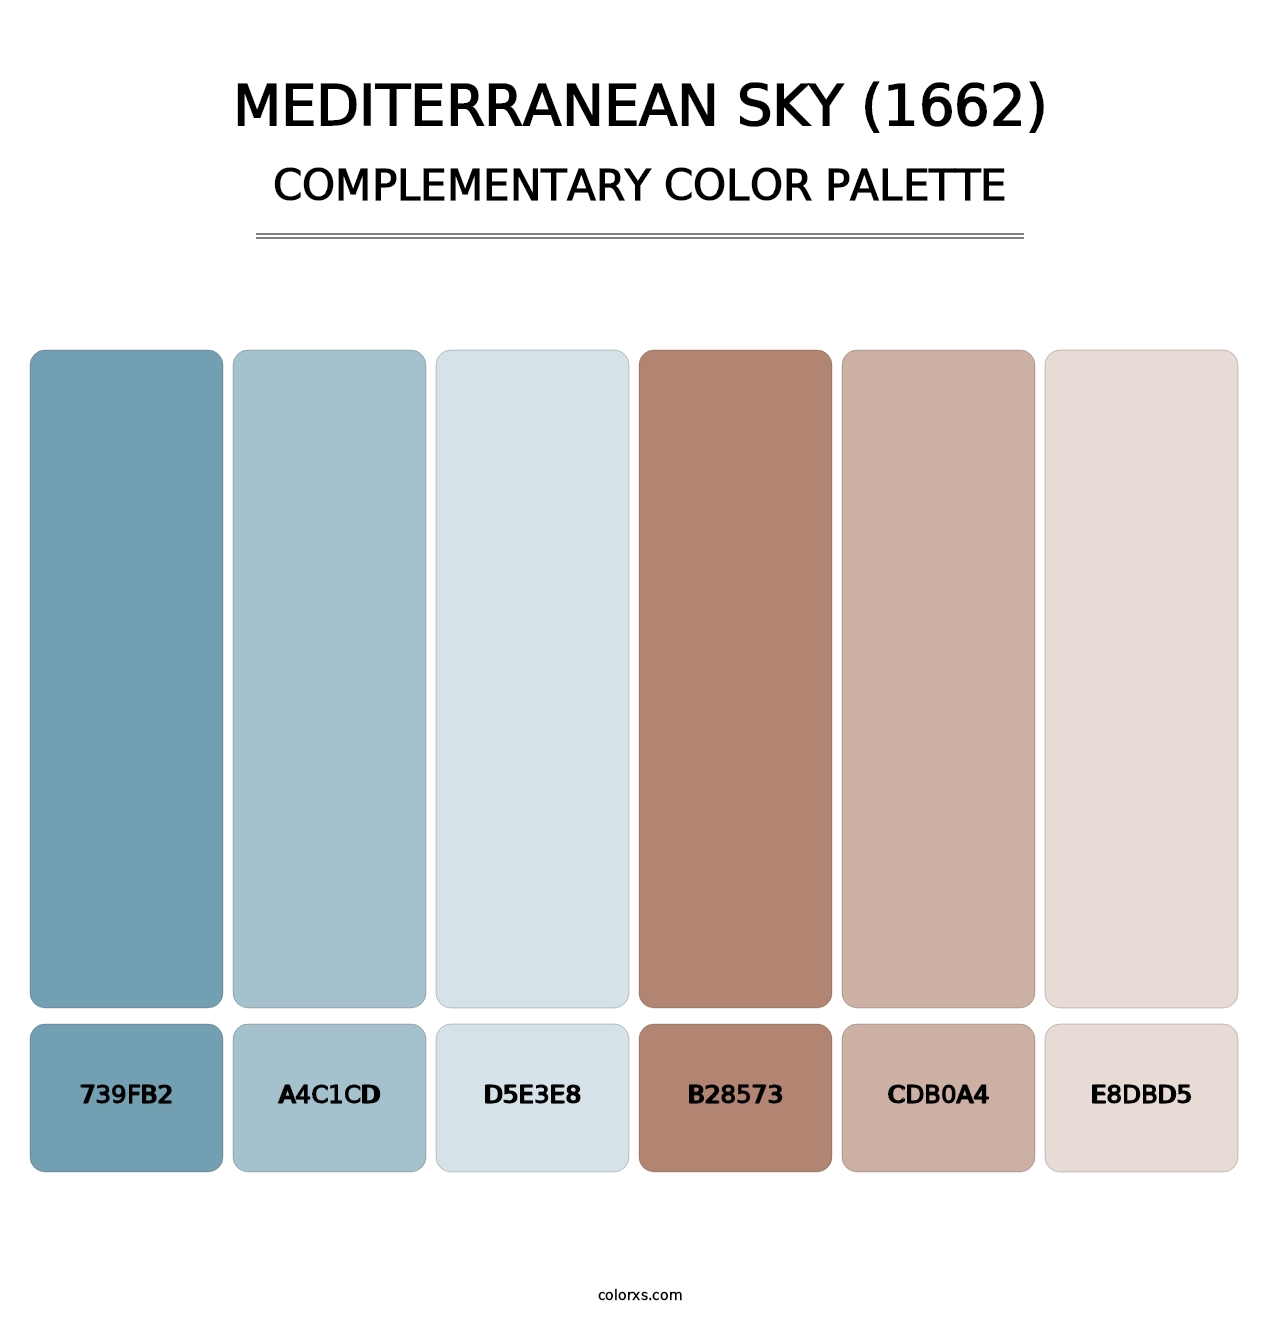 Mediterranean Sky (1662) - Complementary Color Palette